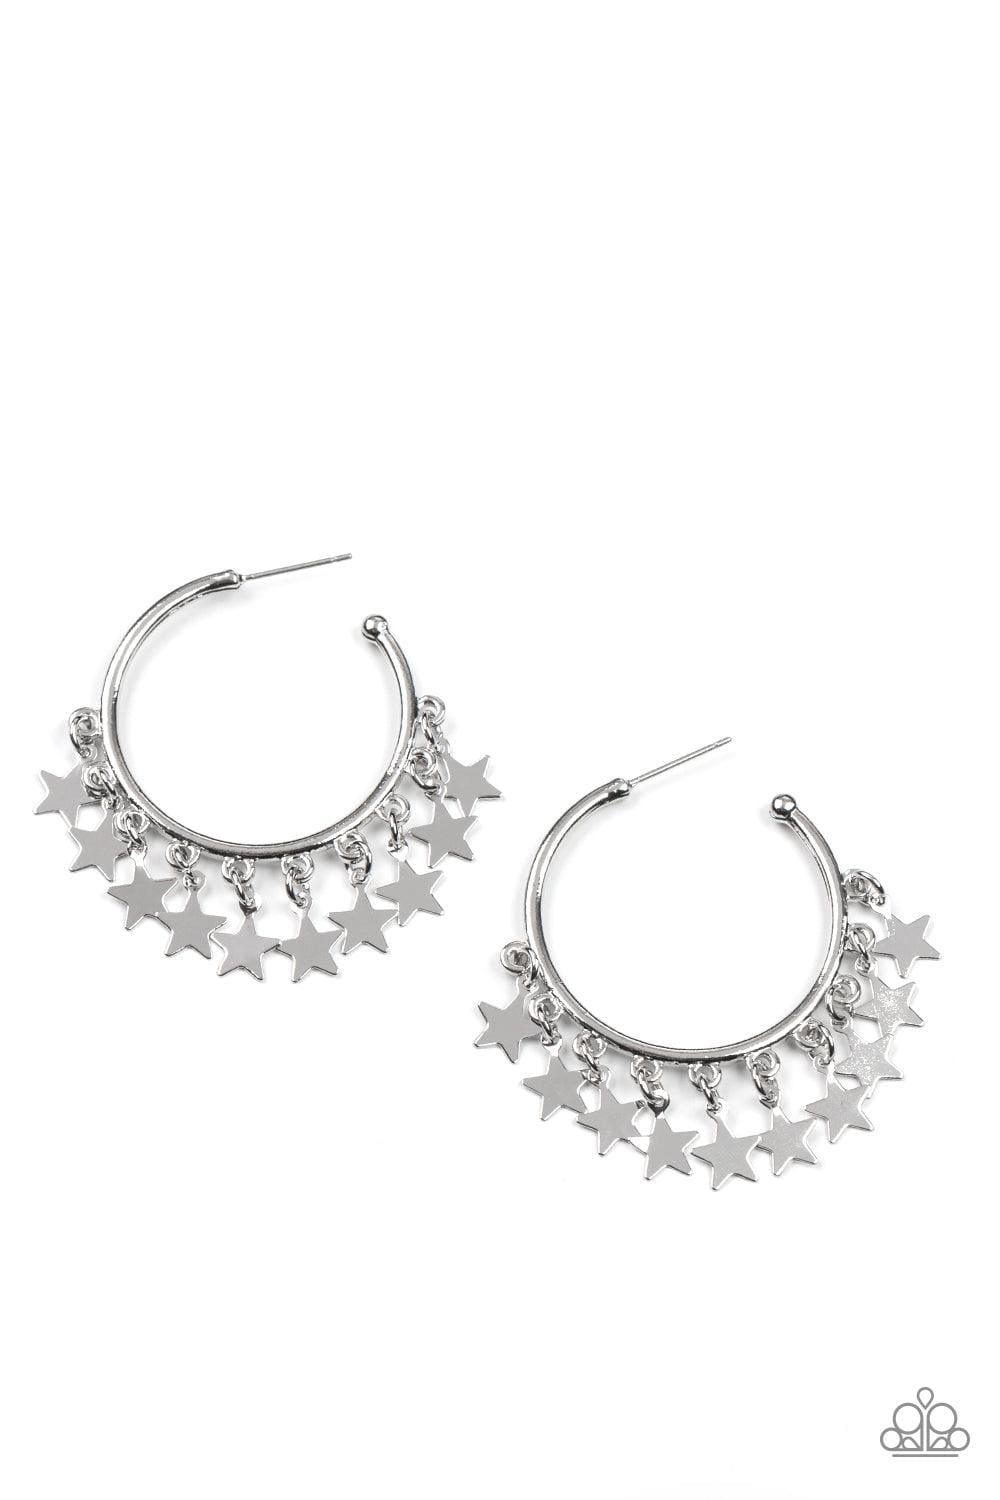 Paparazzi Accessories - Happy Independence Day - Silver Hoop Earrings - Bling by JessieK